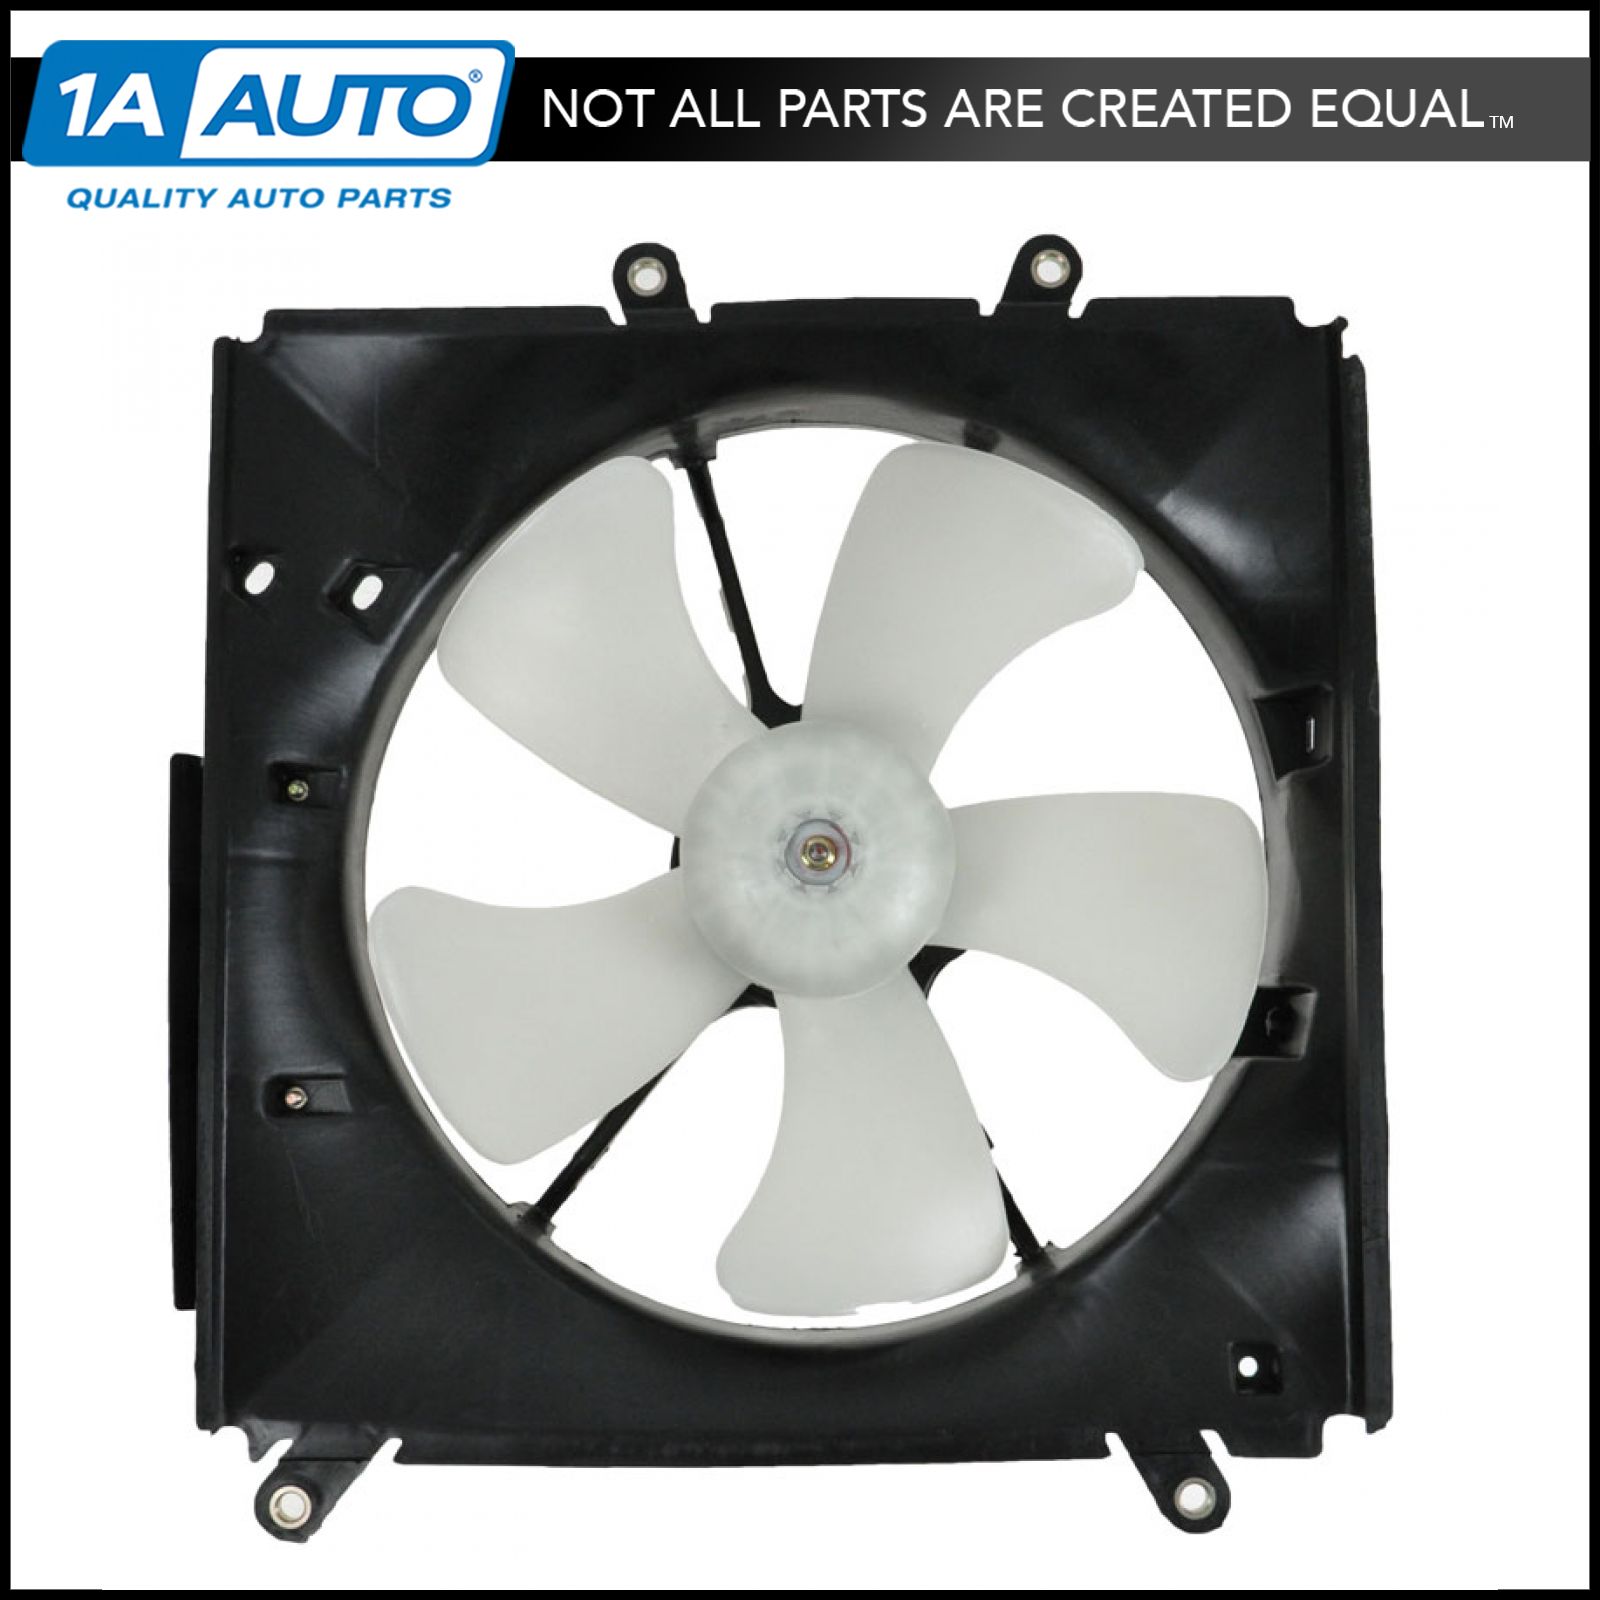 Radiator Cooling Fan & Motor Assembly for 93-97 Toyota Corolla Prizm | eBay 1997 Toyota Corolla Radiator Fan Not Working